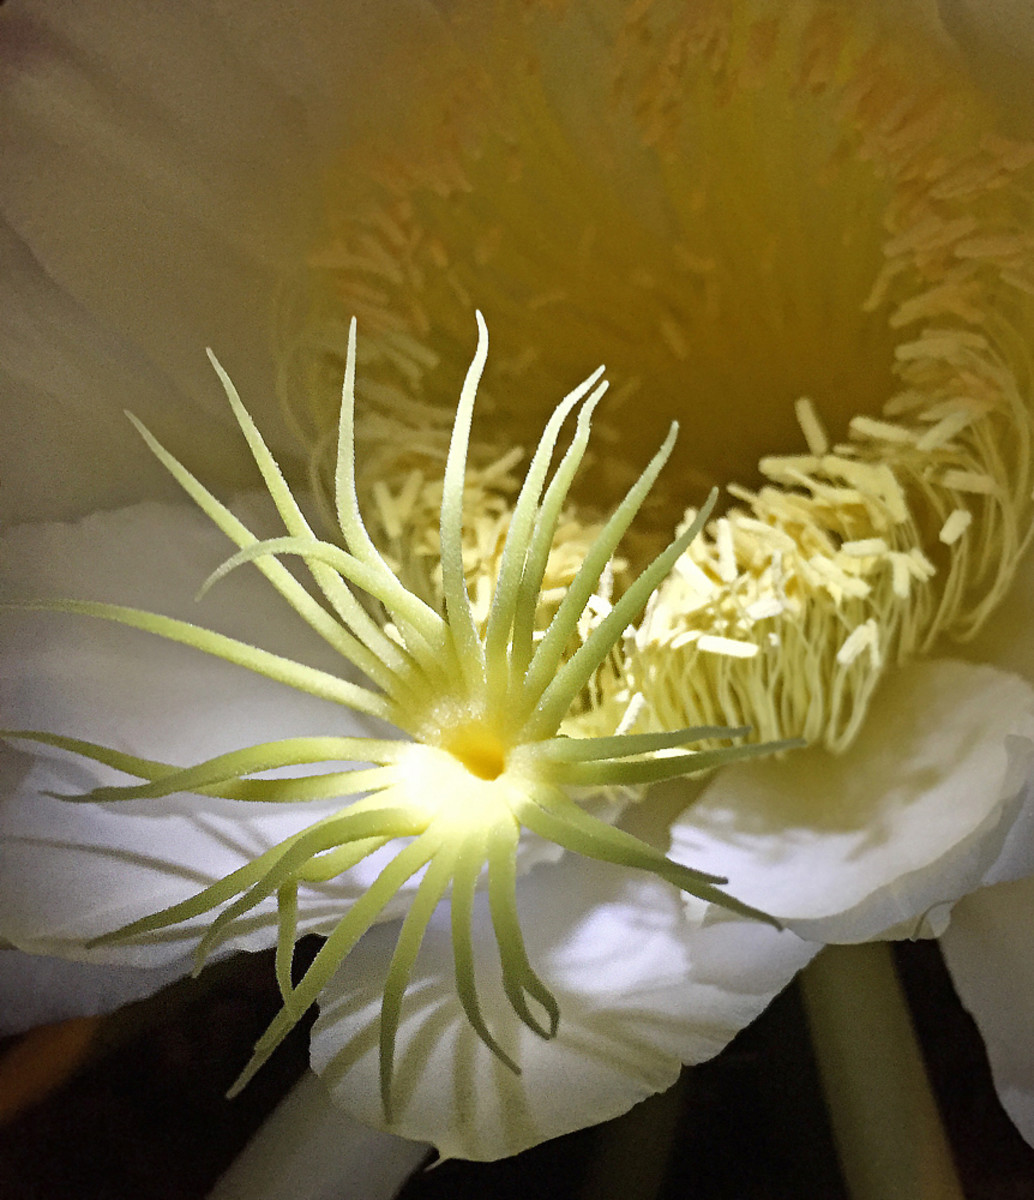 Is that a sea monster or the reproductive part of a Night-blooming Cereus flower?